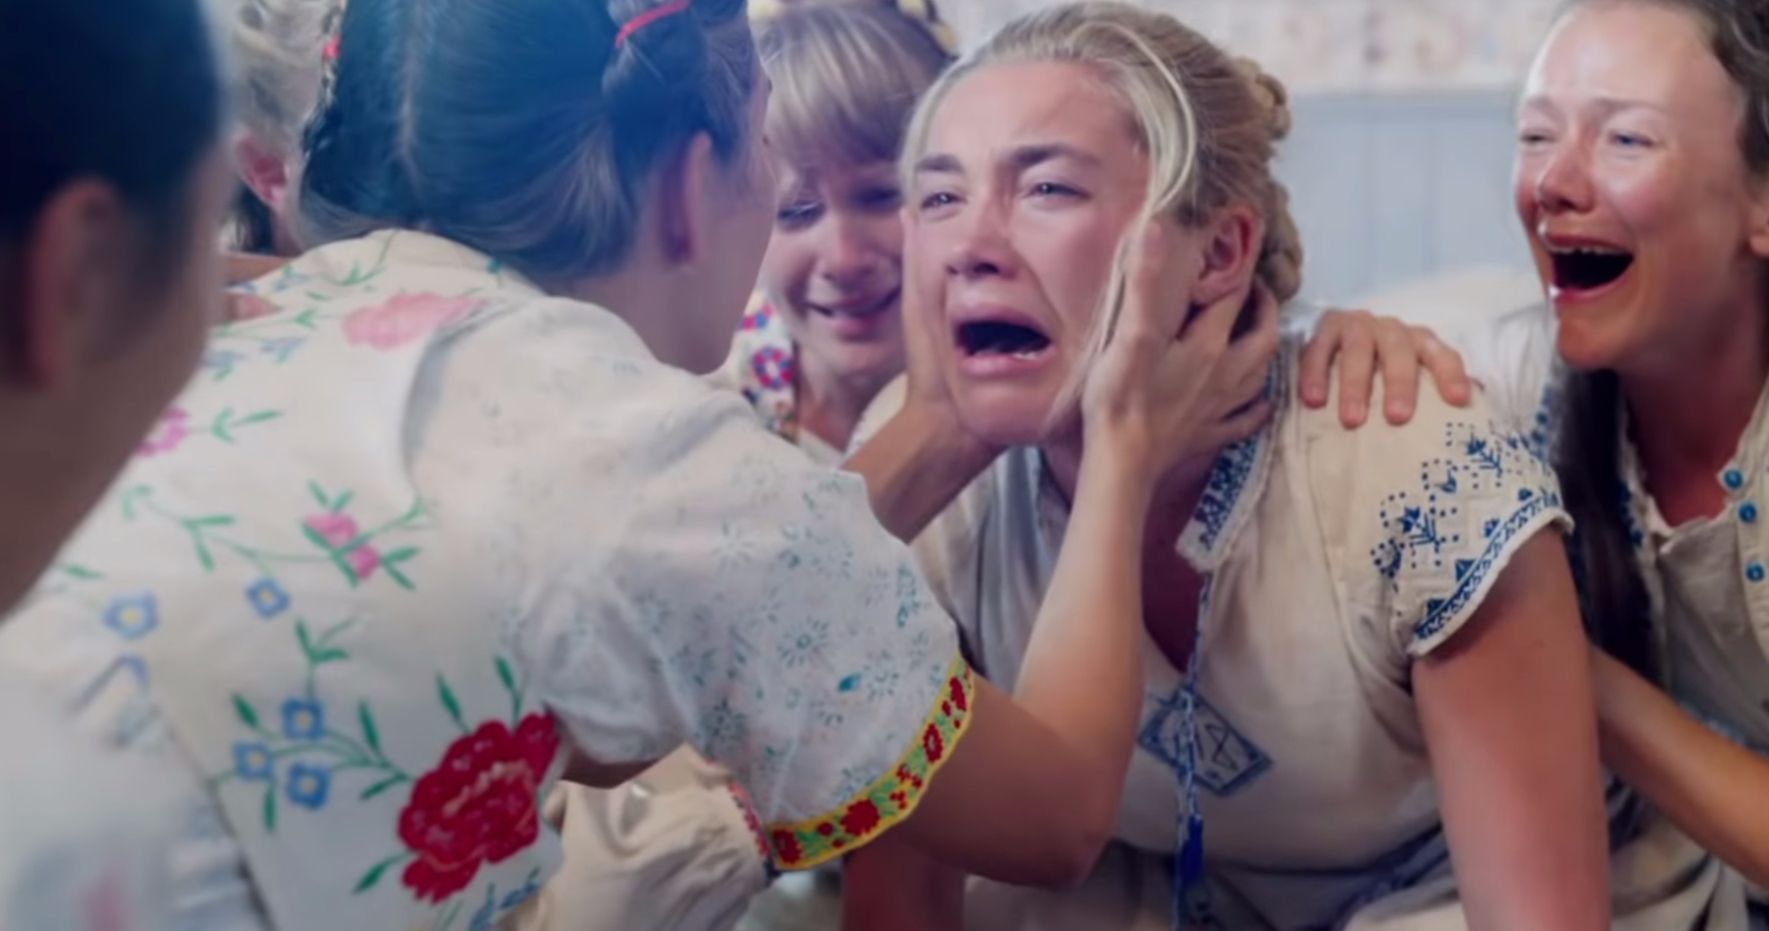 Midsommar Review: Hereditary Director Provides an All-New Nightmare